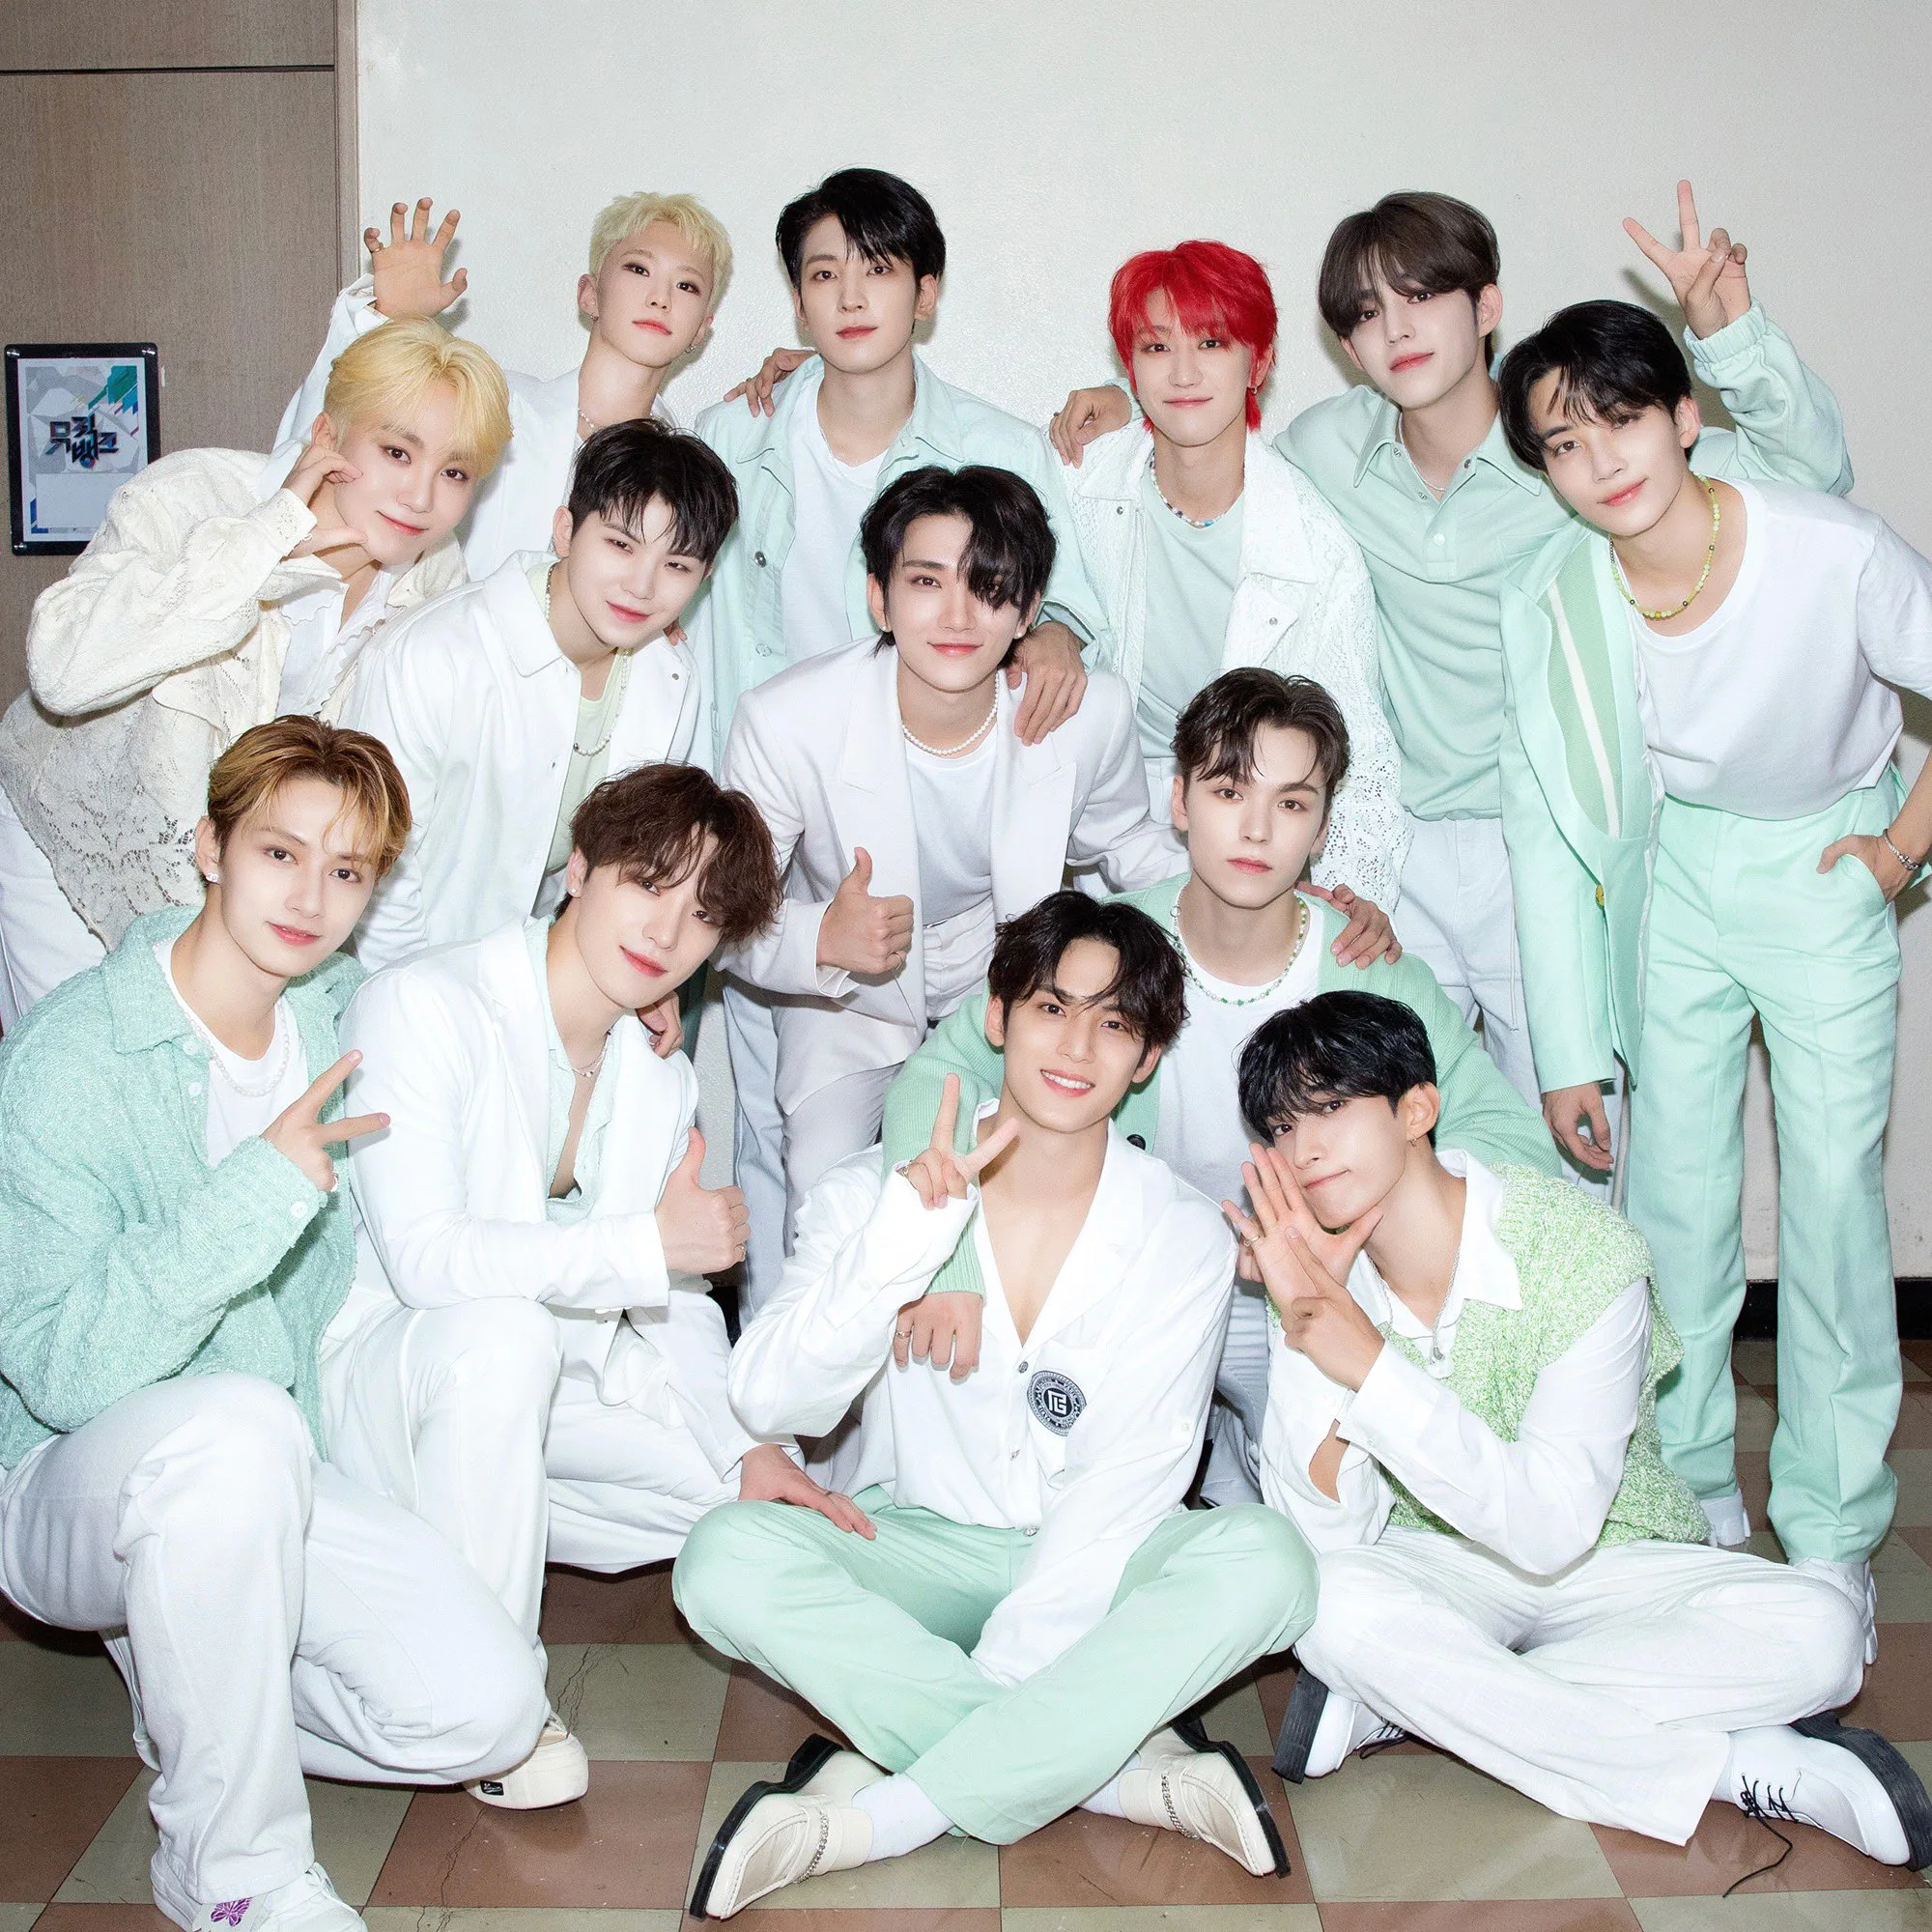 A Beginner's Guide to Seventeen - The RepresentASIAN Project